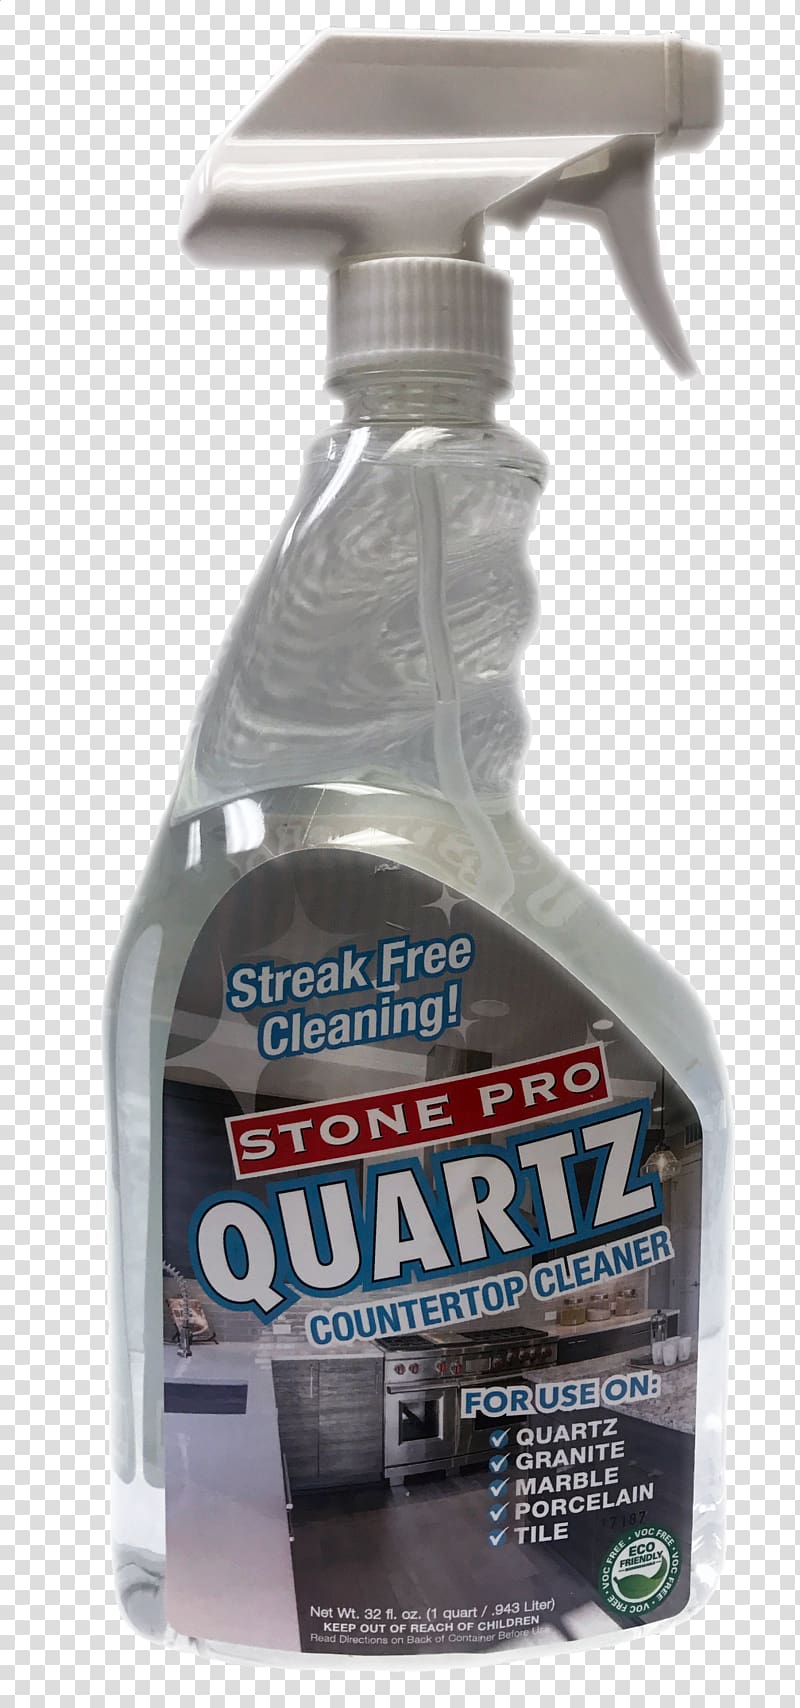 Countertop Engineered stone Cleaner Quartz Floor cleaning, glass transparent background PNG clipart